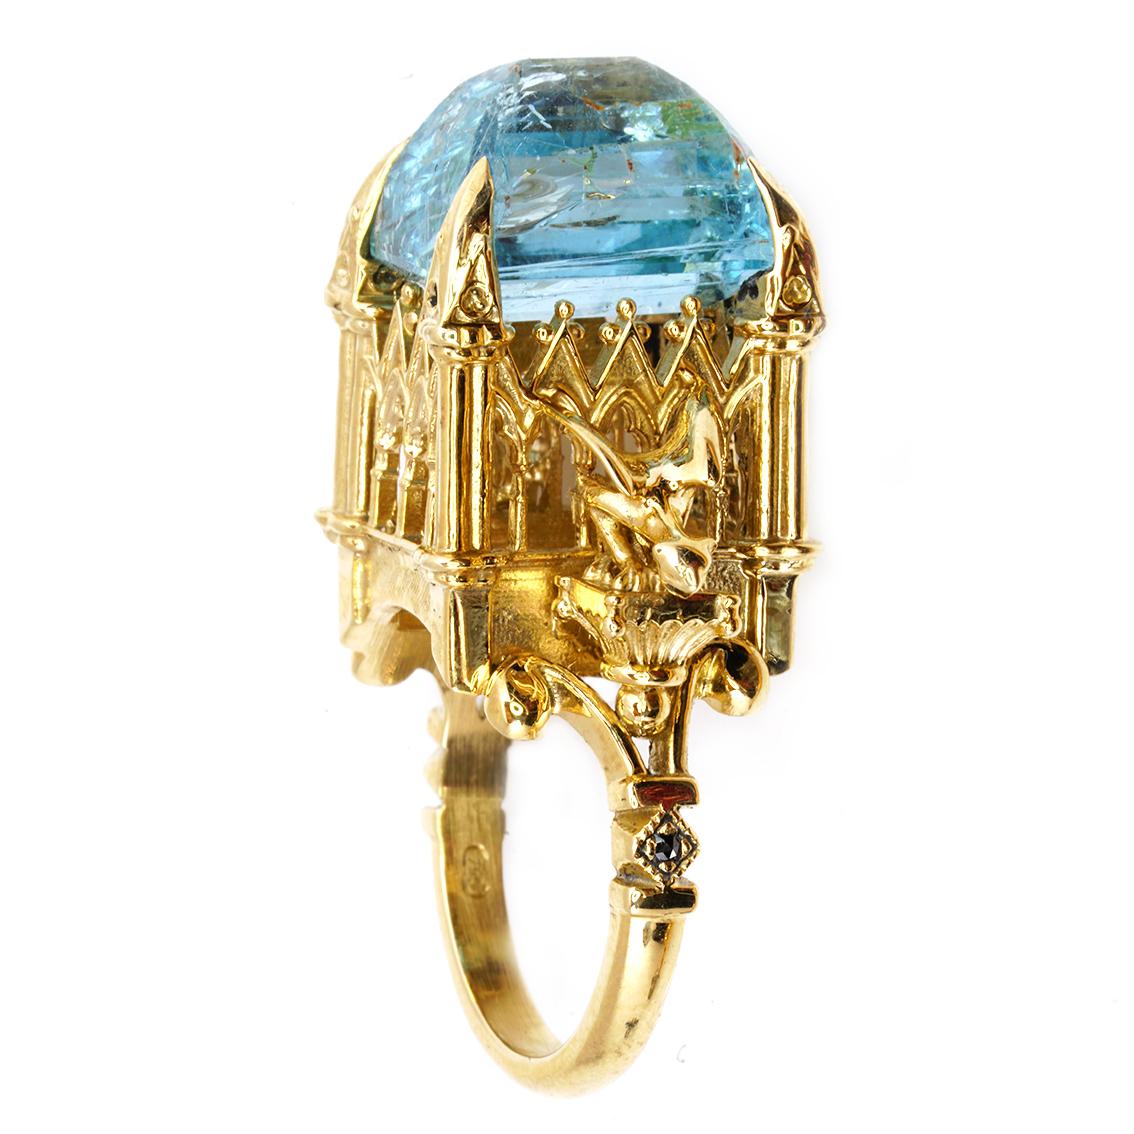 The Almighty Empress Ring is a luminous, baroque dream. This stunning piece is one of a kind and fits a size 6 1/2 (Australian & British size N).

Handcrafted in 18kt yellow gold the ring features a vibrant, 14.3mm x 11.5mm aquamarine. The addition